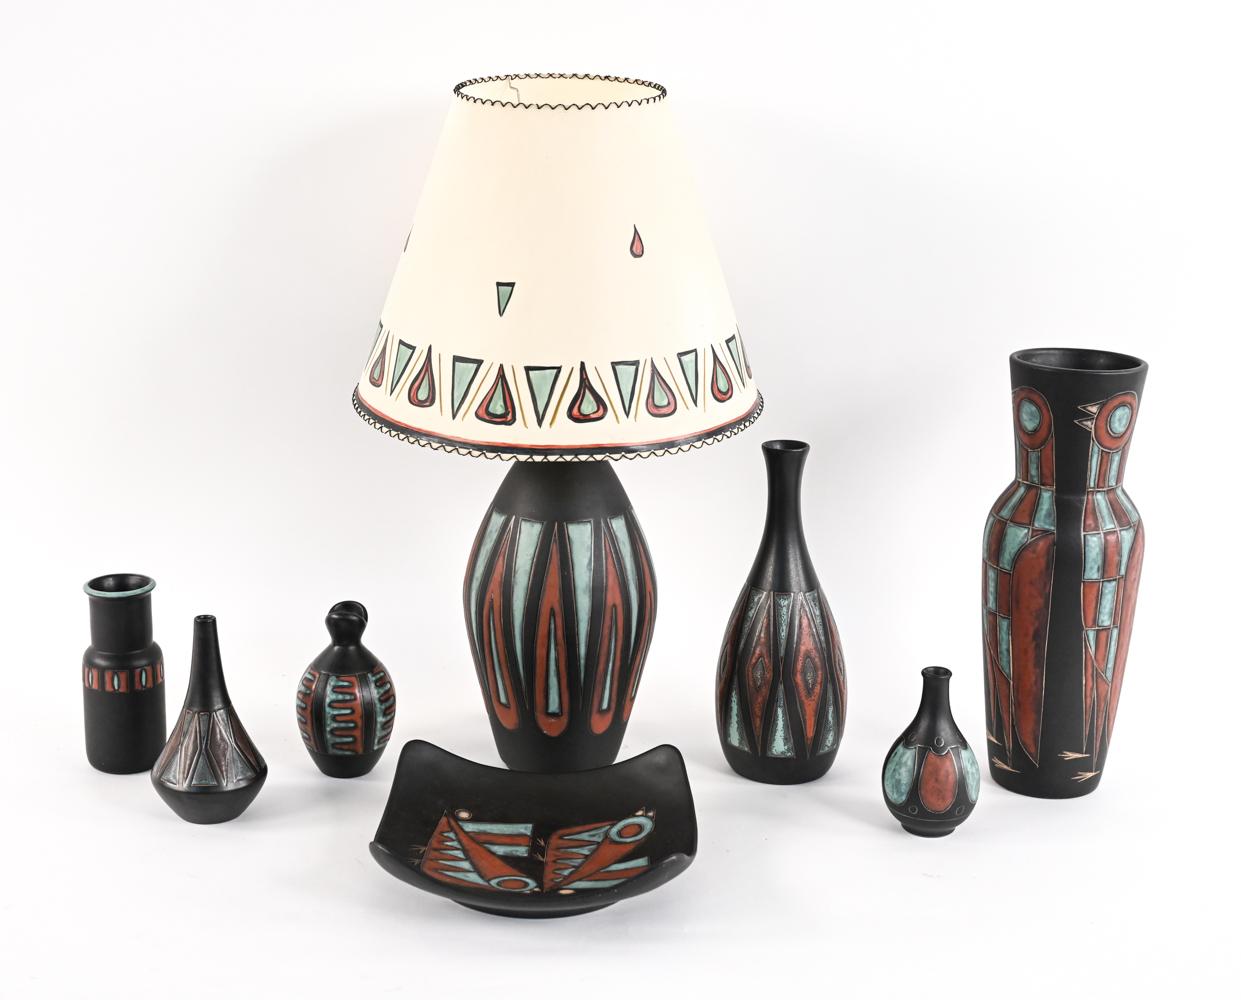 A fabulous collection of eight pieces of Danish mid-century pottery, designed by Marianne Starck for Michael Andersen & Son. This grouping includes six vases, a dish, and a lamp with a hand-painted shade, all from the same collection in matching